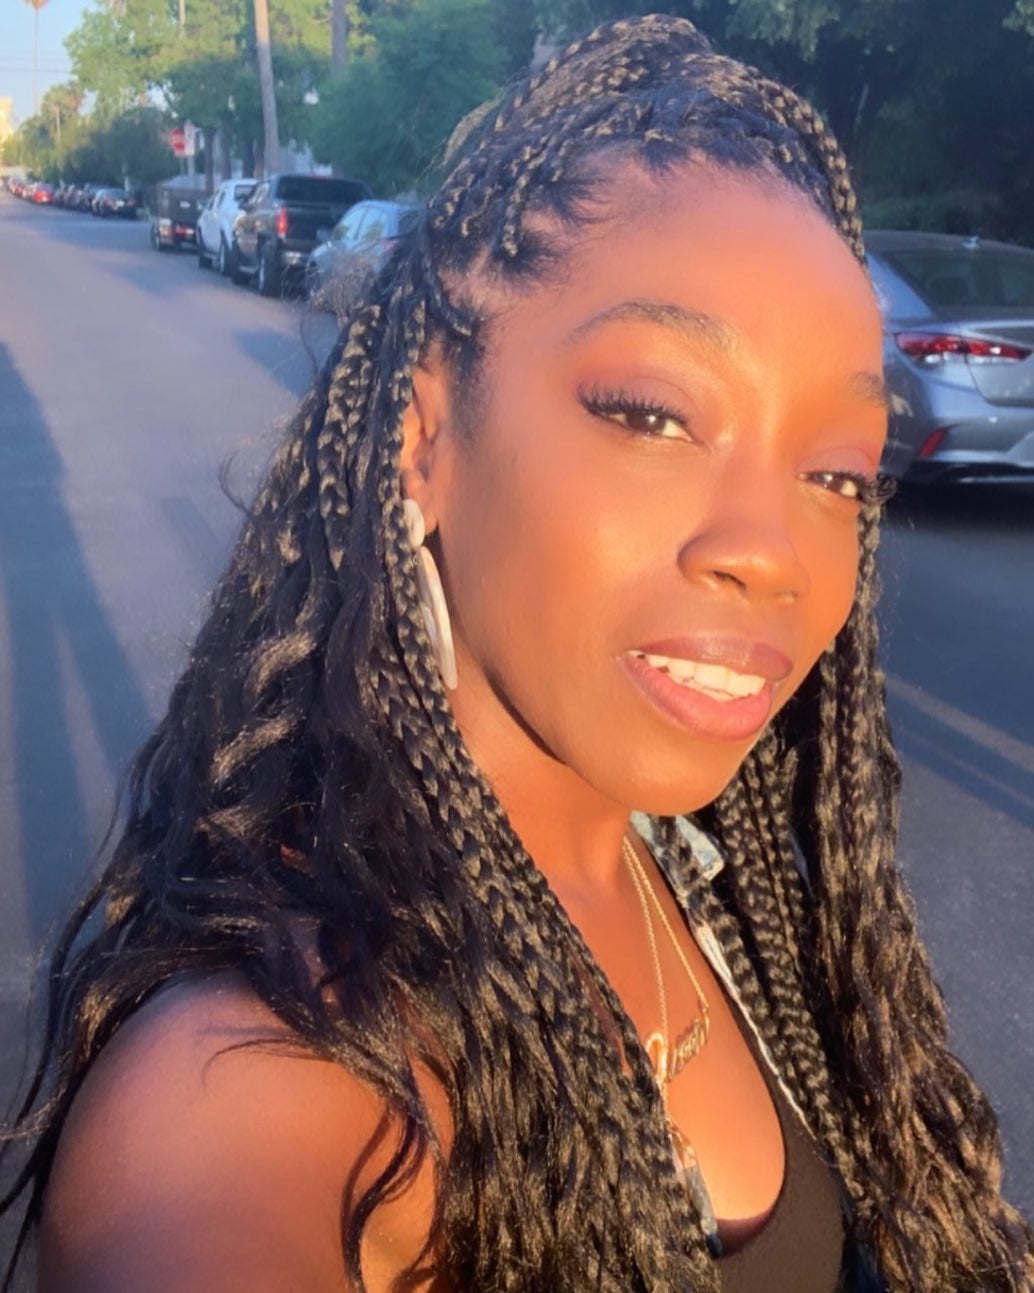 Dreezy, Loni Love, Shalom Blac And Other Celebrity Beauty Photos Of The Week